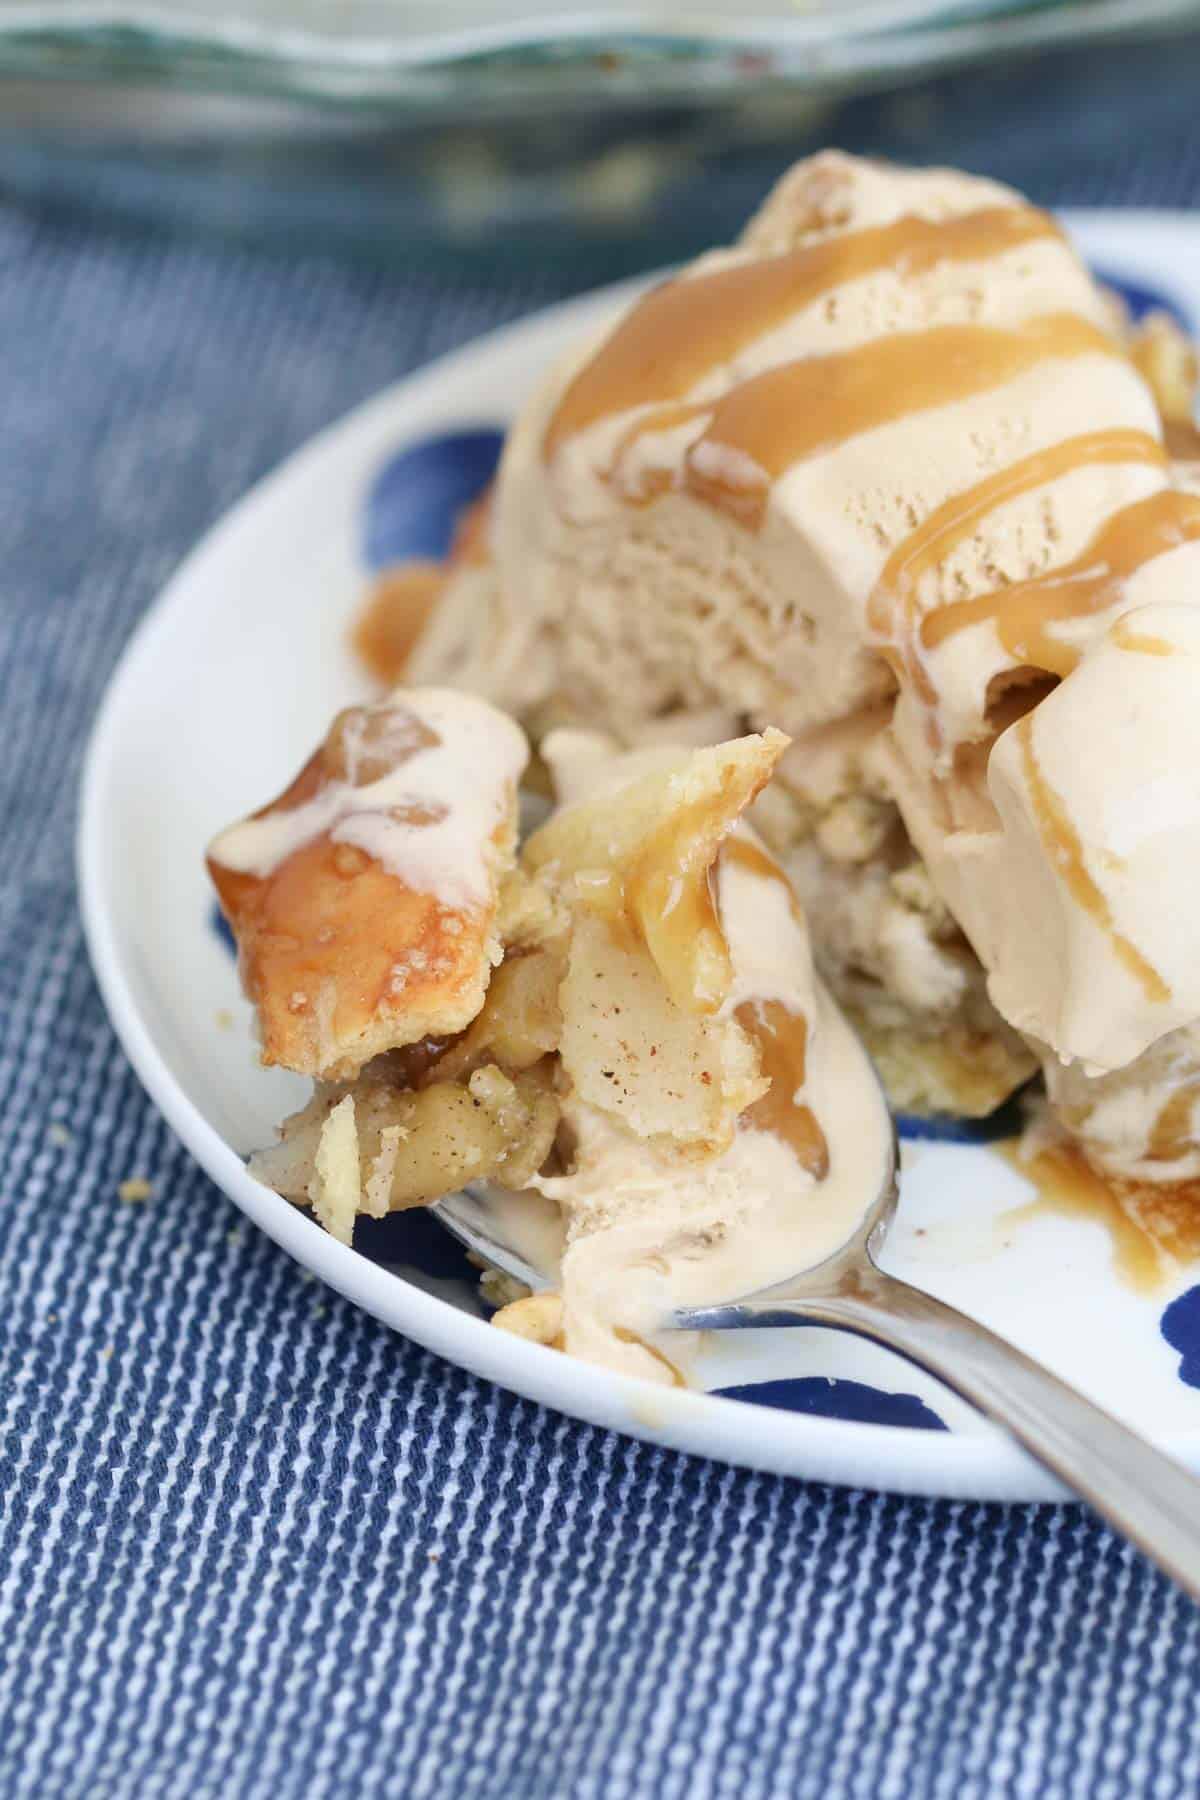 A spoonful of dessert with caramel sauce and ice cream.